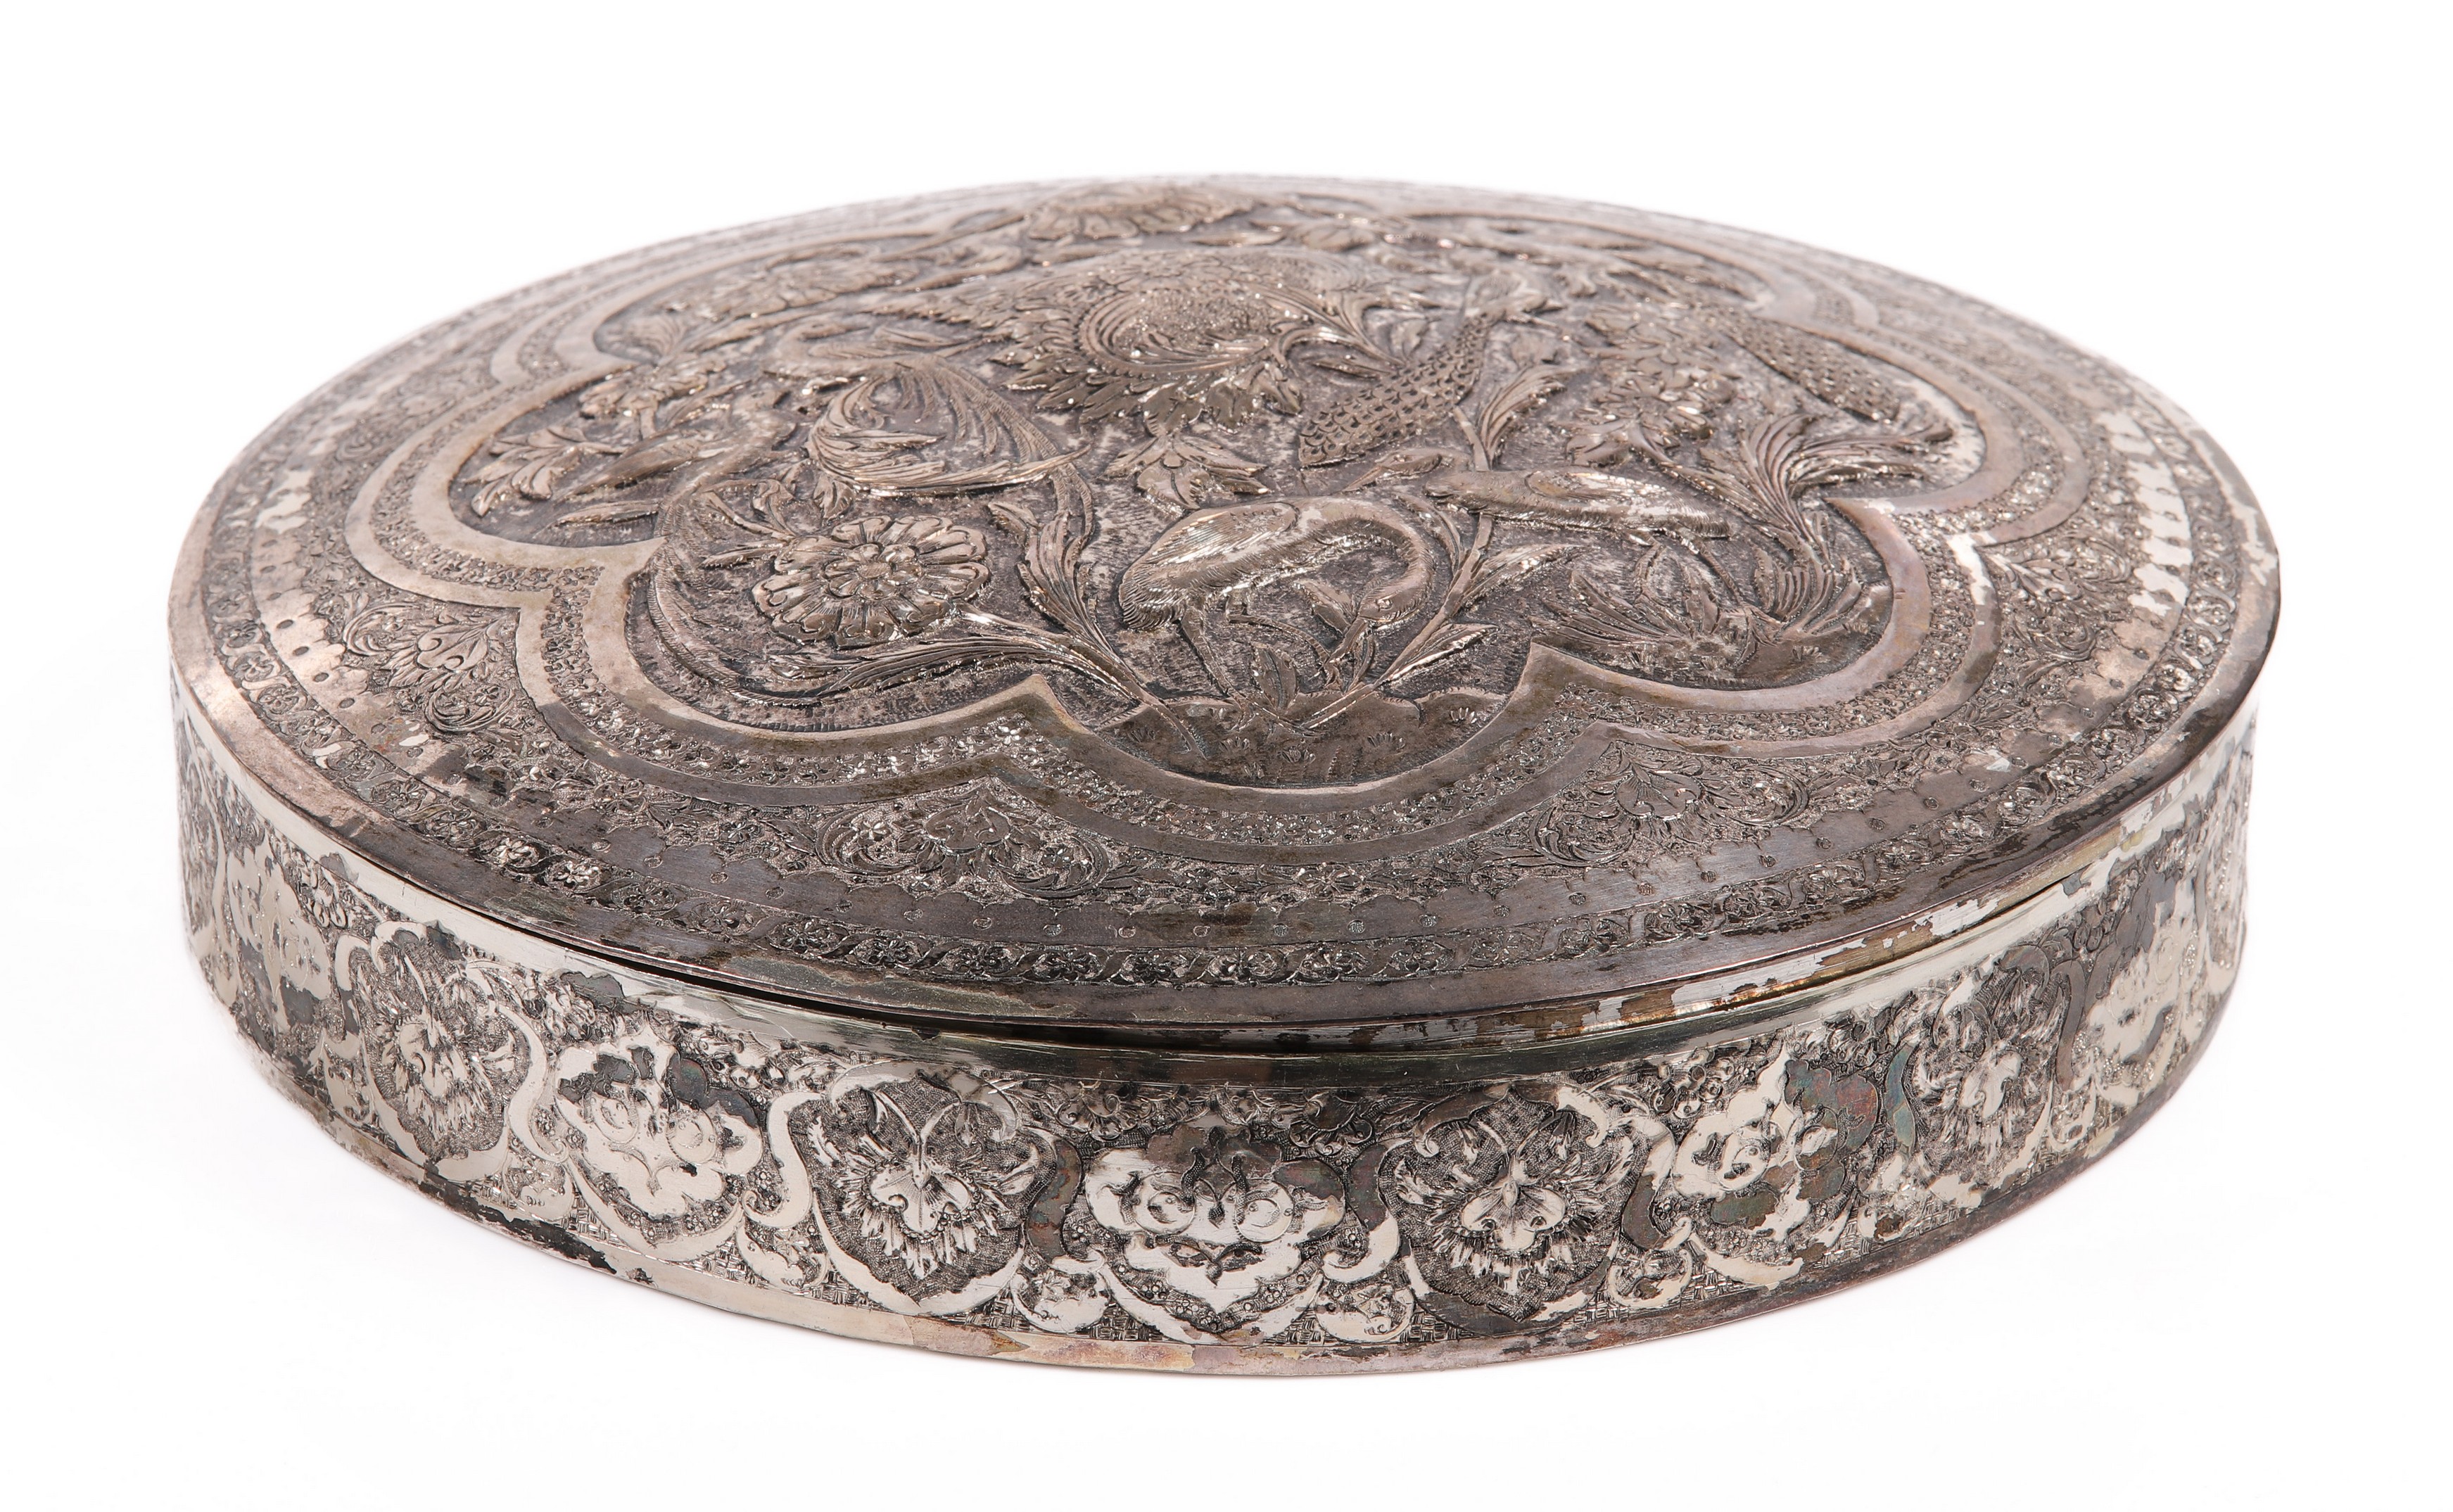 Persian silver repousse and engraved 3b44ce